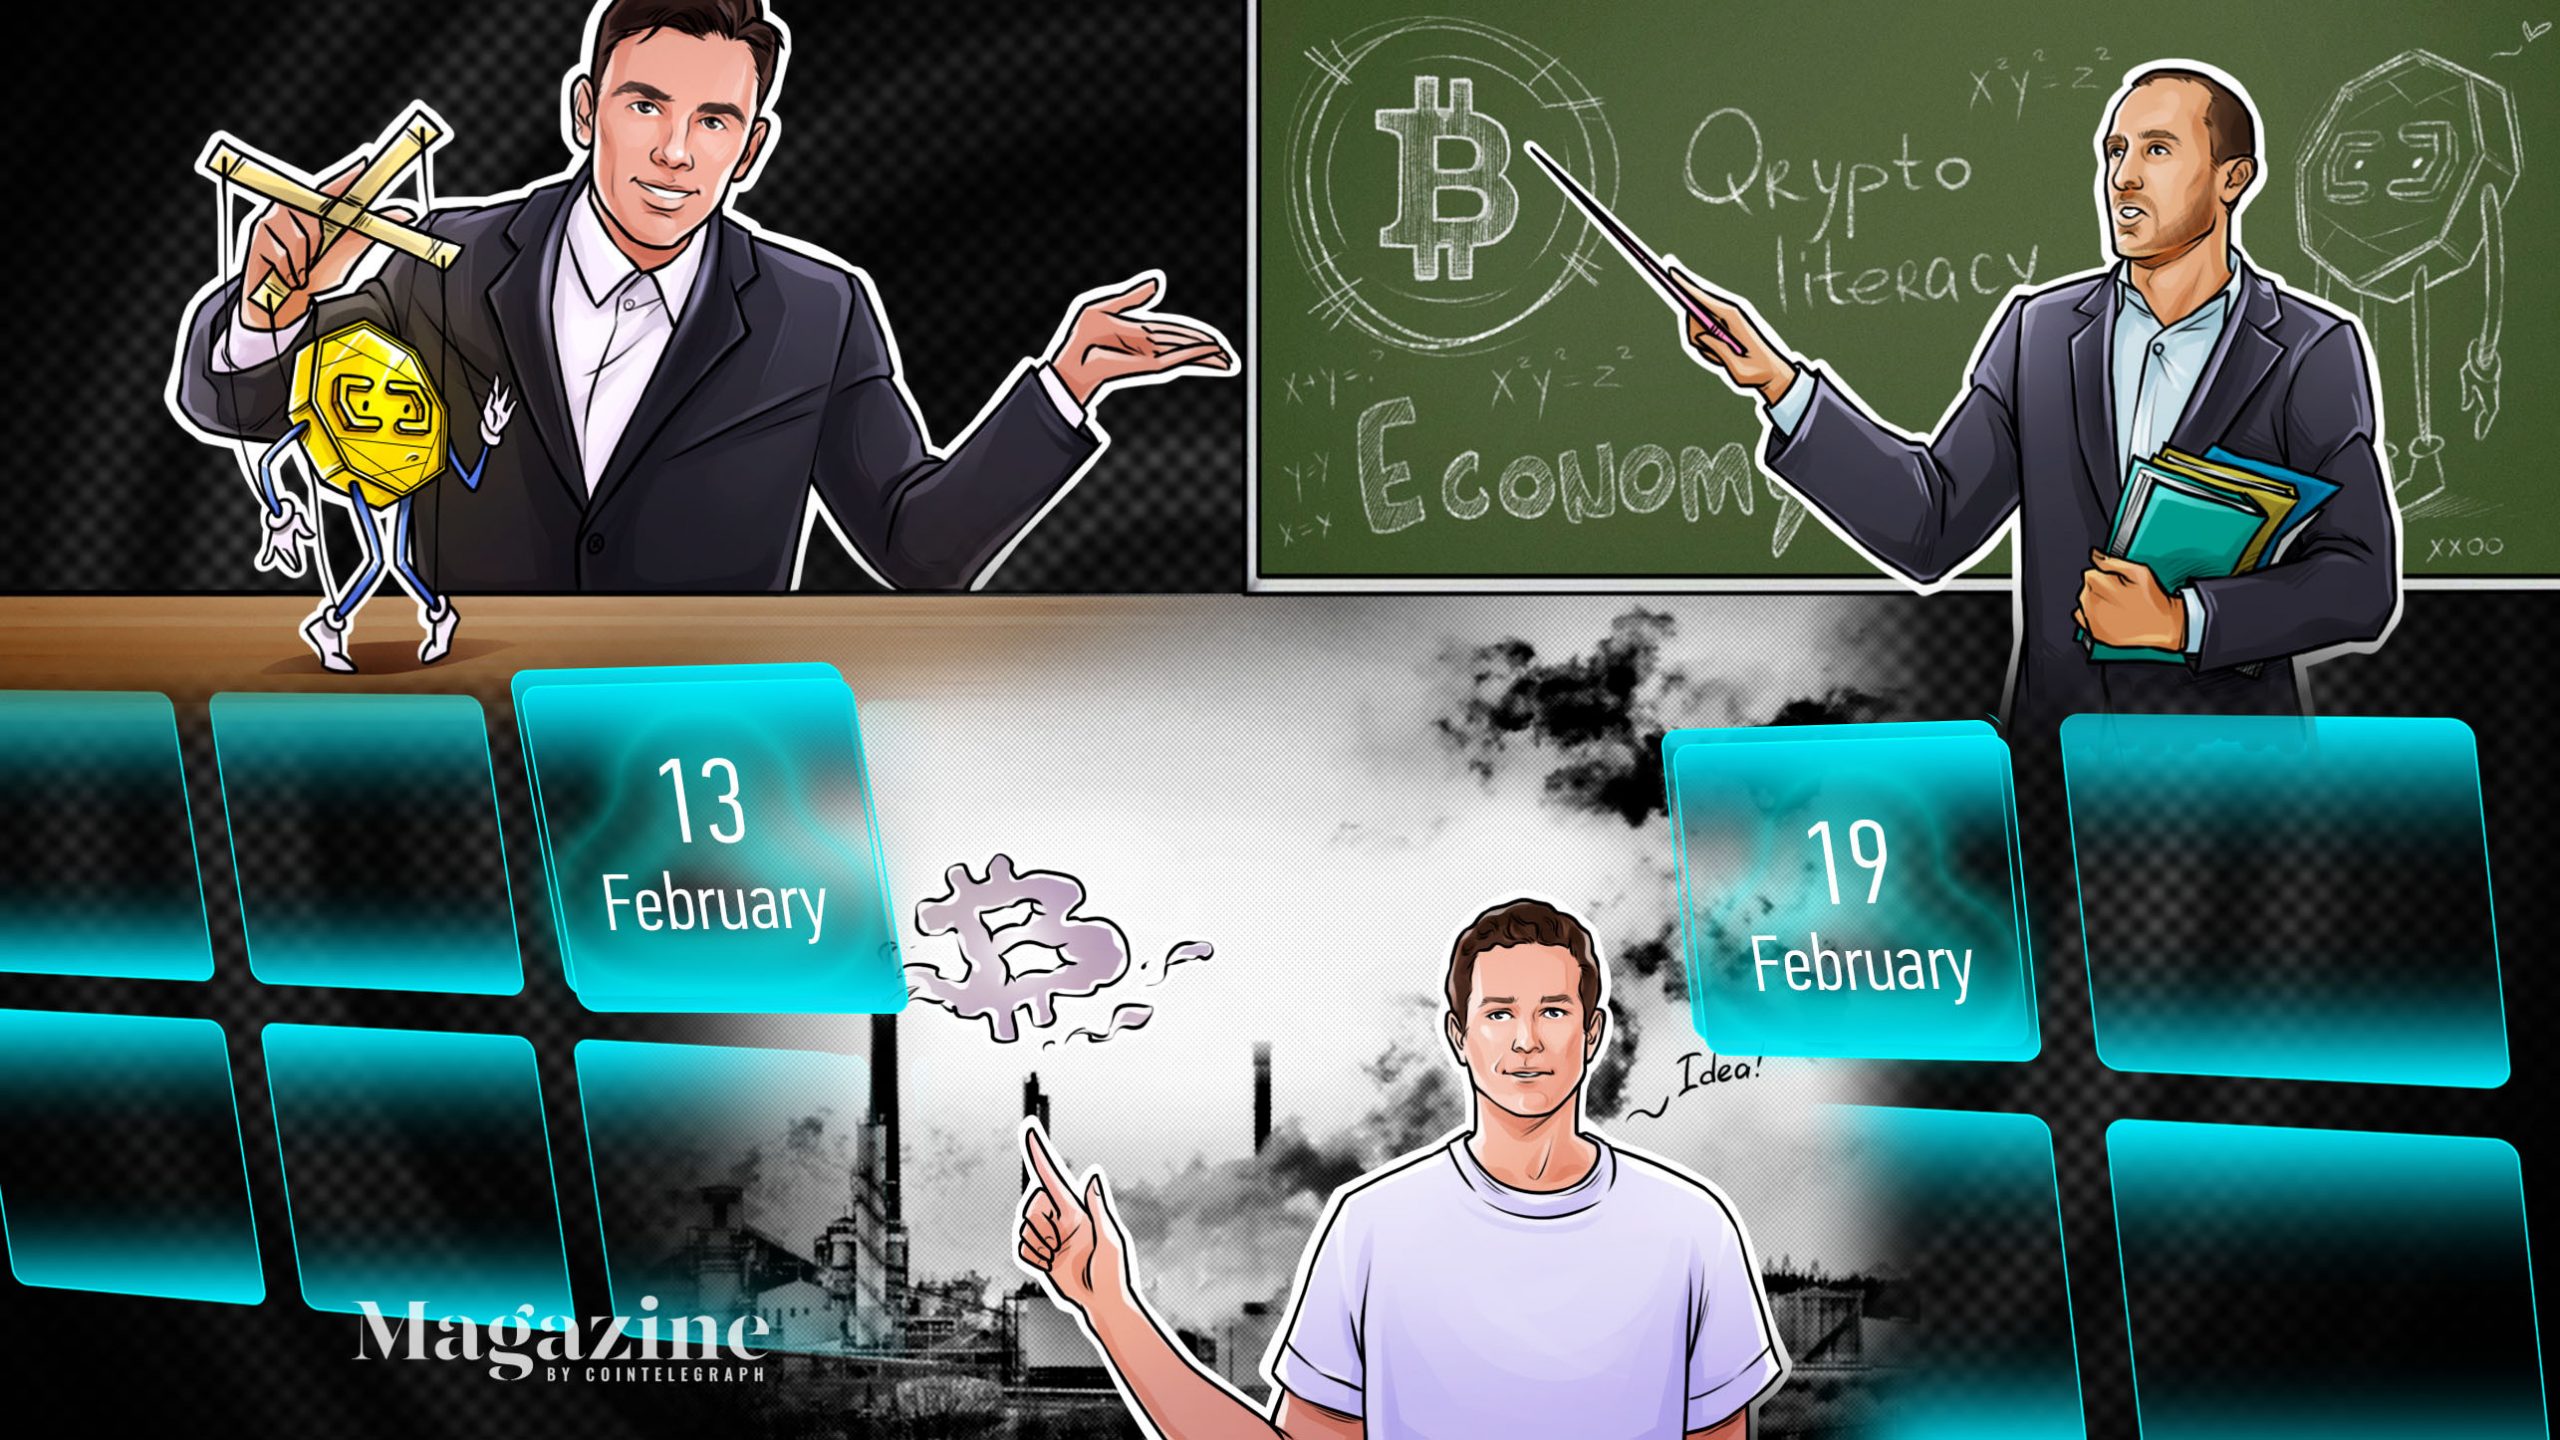 BlockFi settles with the SEC, Russia’s CBDC trials begin and Cointelegraph releases its 2022 top-100 list: Hodler’s Digest, Feb. 13-19